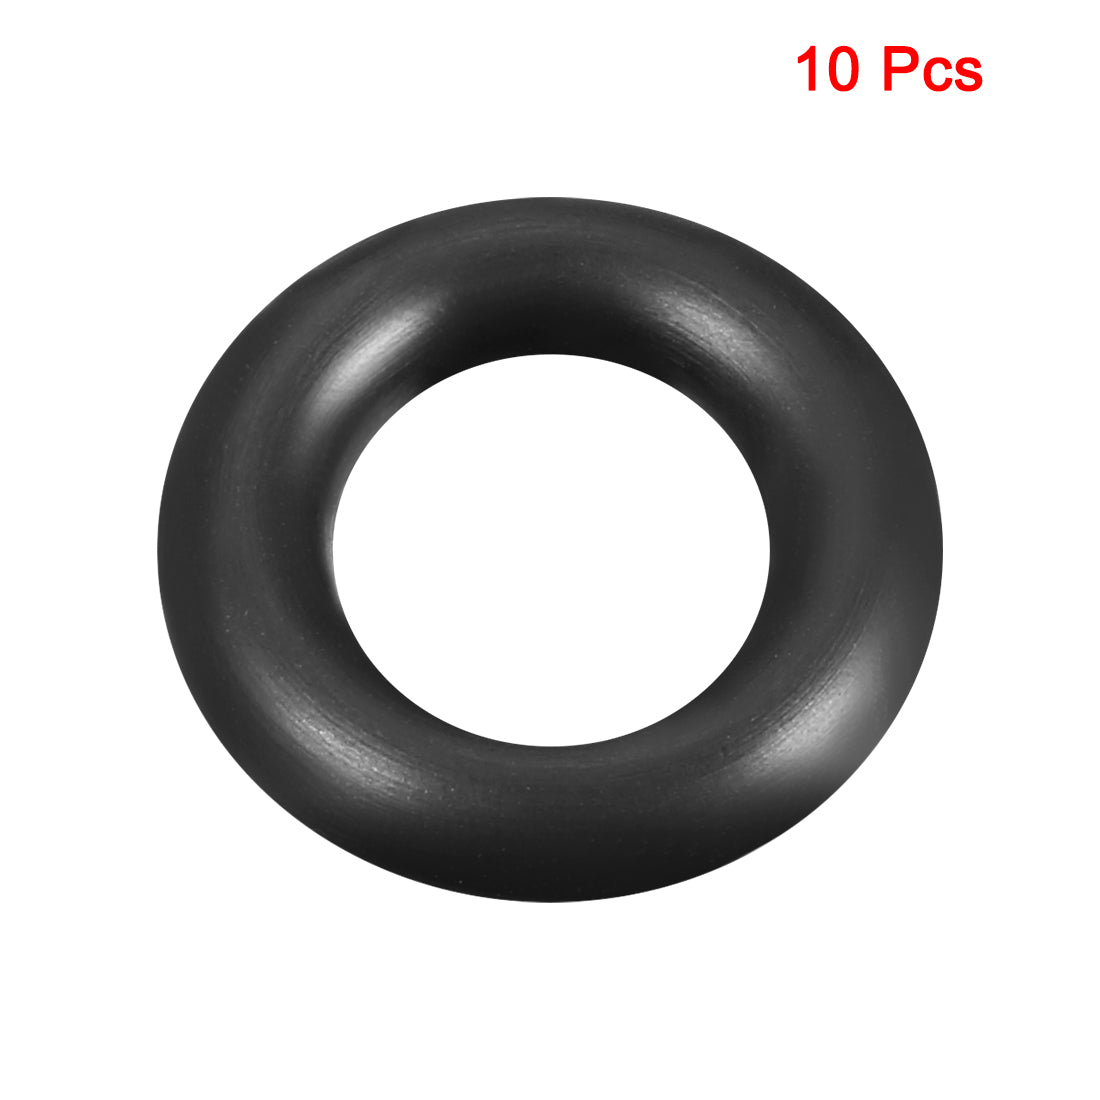 uxcell Uxcell O-Rings Nitrile Rubber 12mm x 22mm x 5mm Seal Rings Sealing Gasket 10pcs